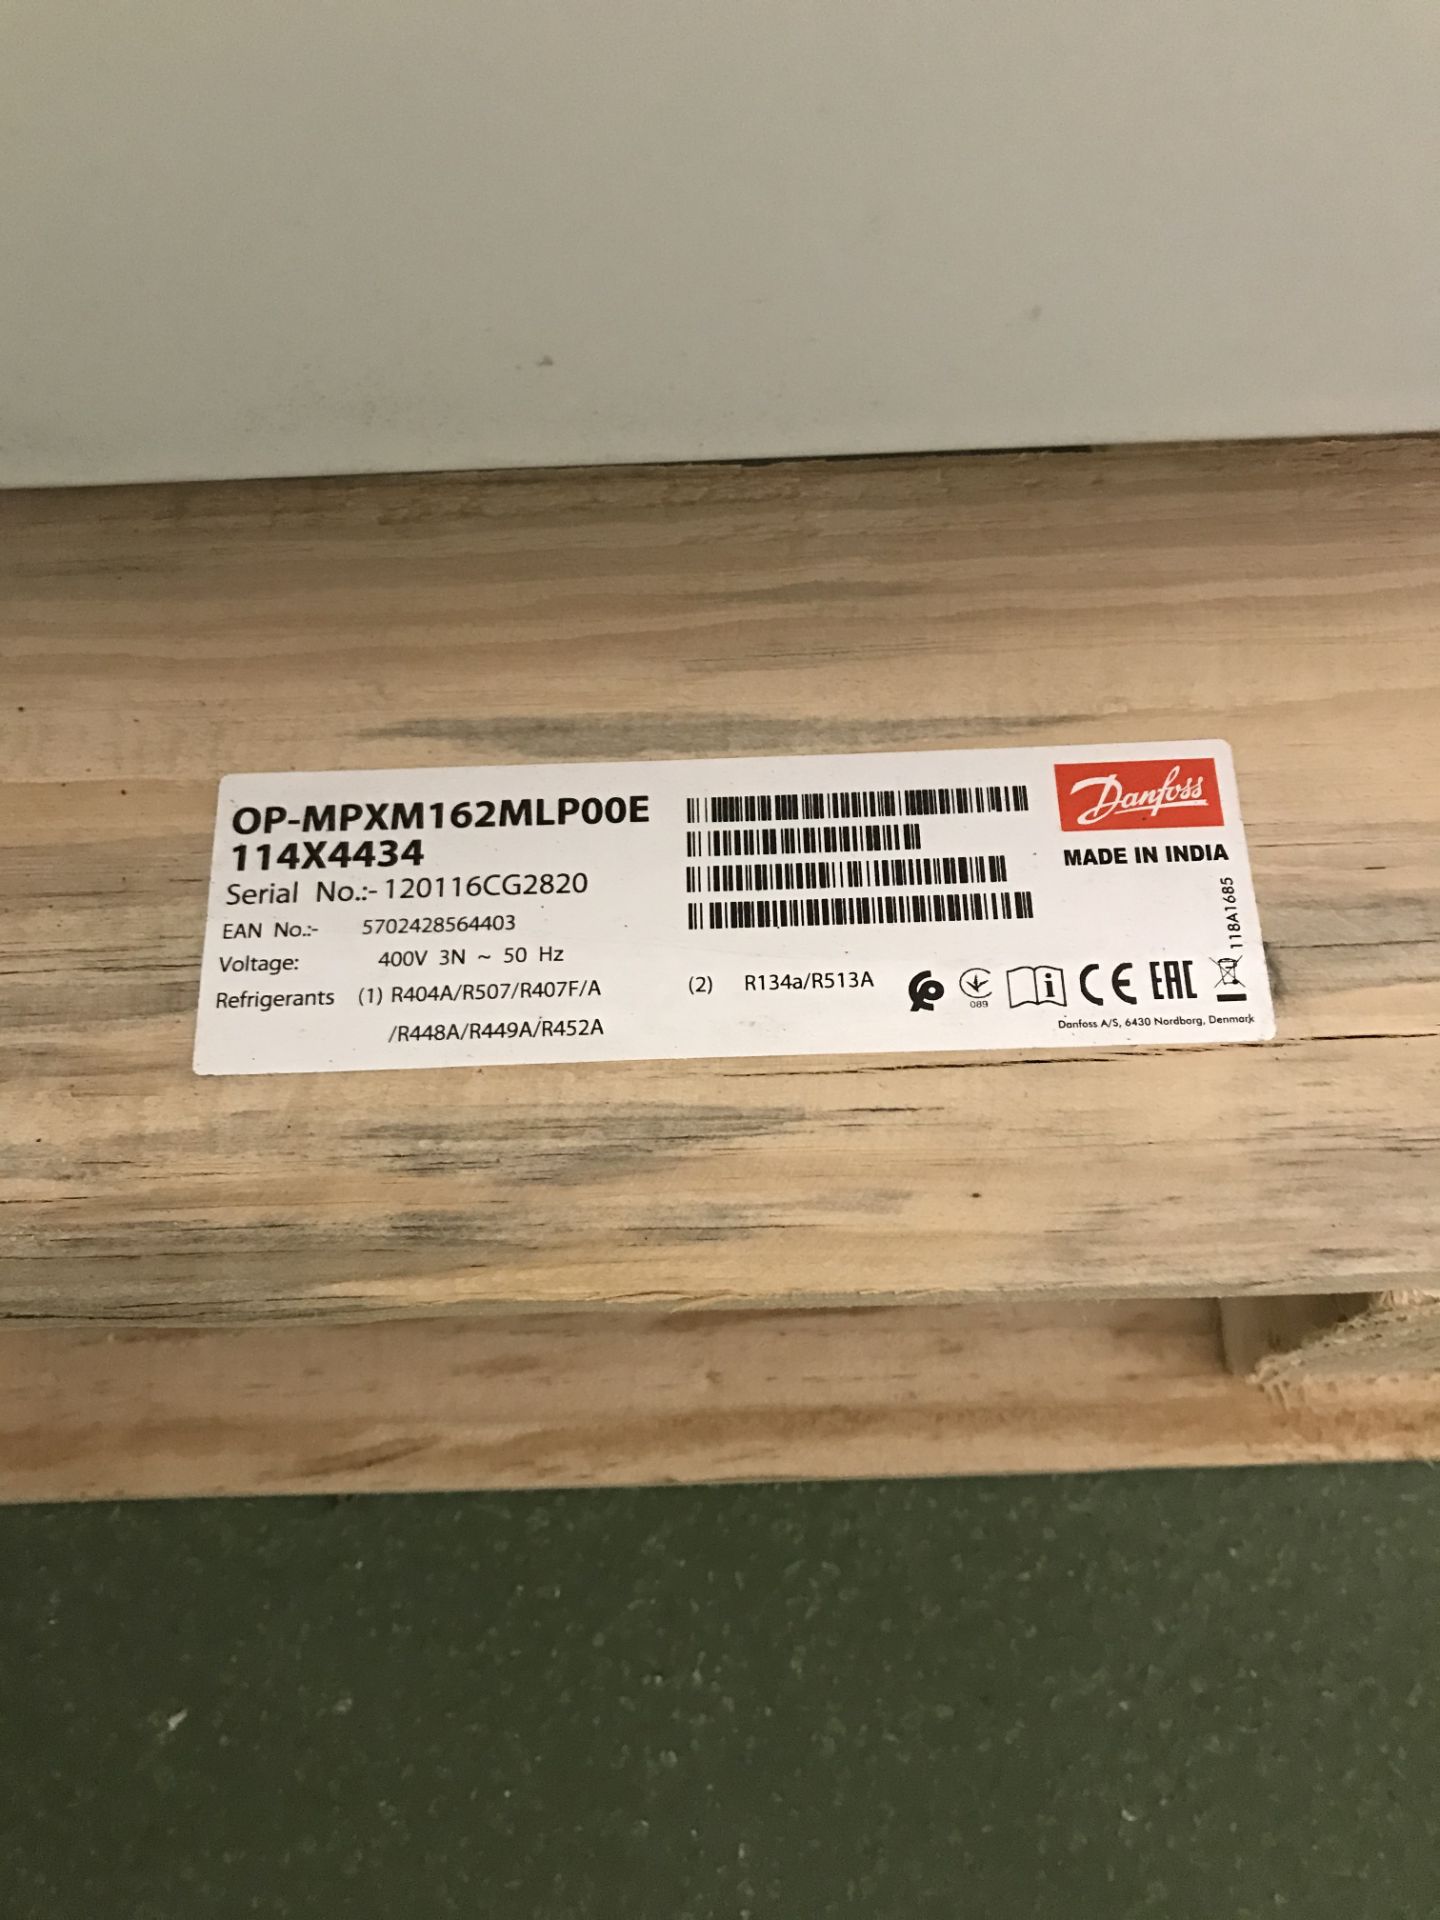 Danfoss Optyma Plus OP-MPXM162MLP00E Packaged/Outd - Image 3 of 4